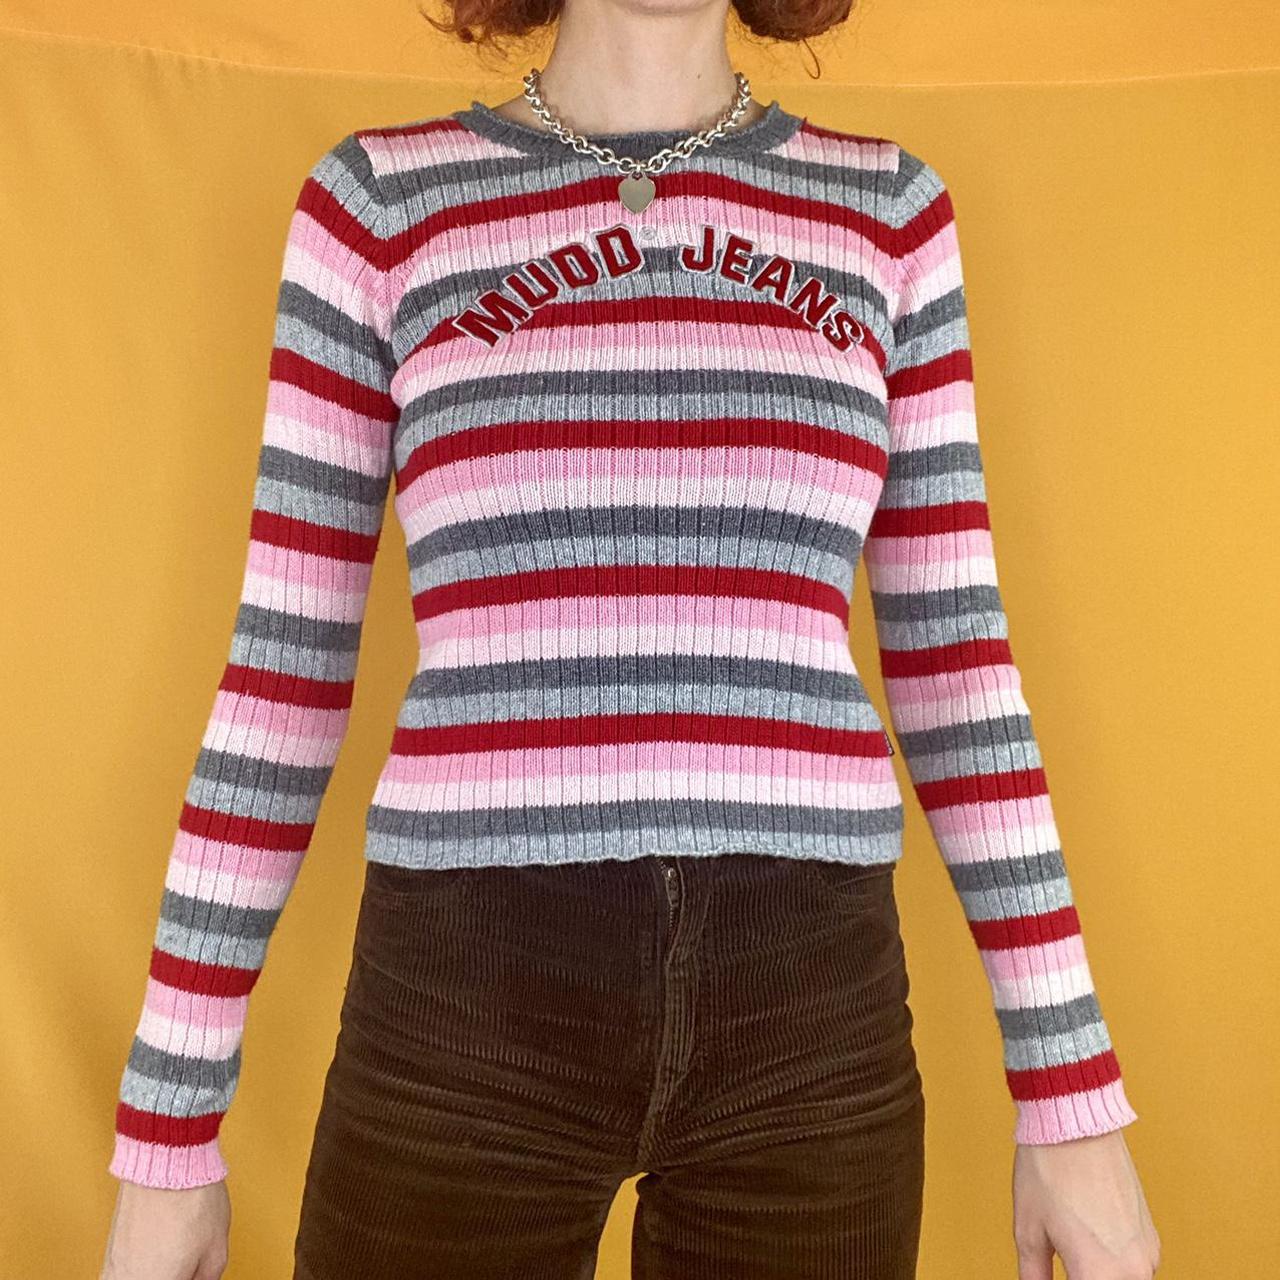 Product Image 2 - VINTAGE MUDD JEANS SWEATER!
multi colored